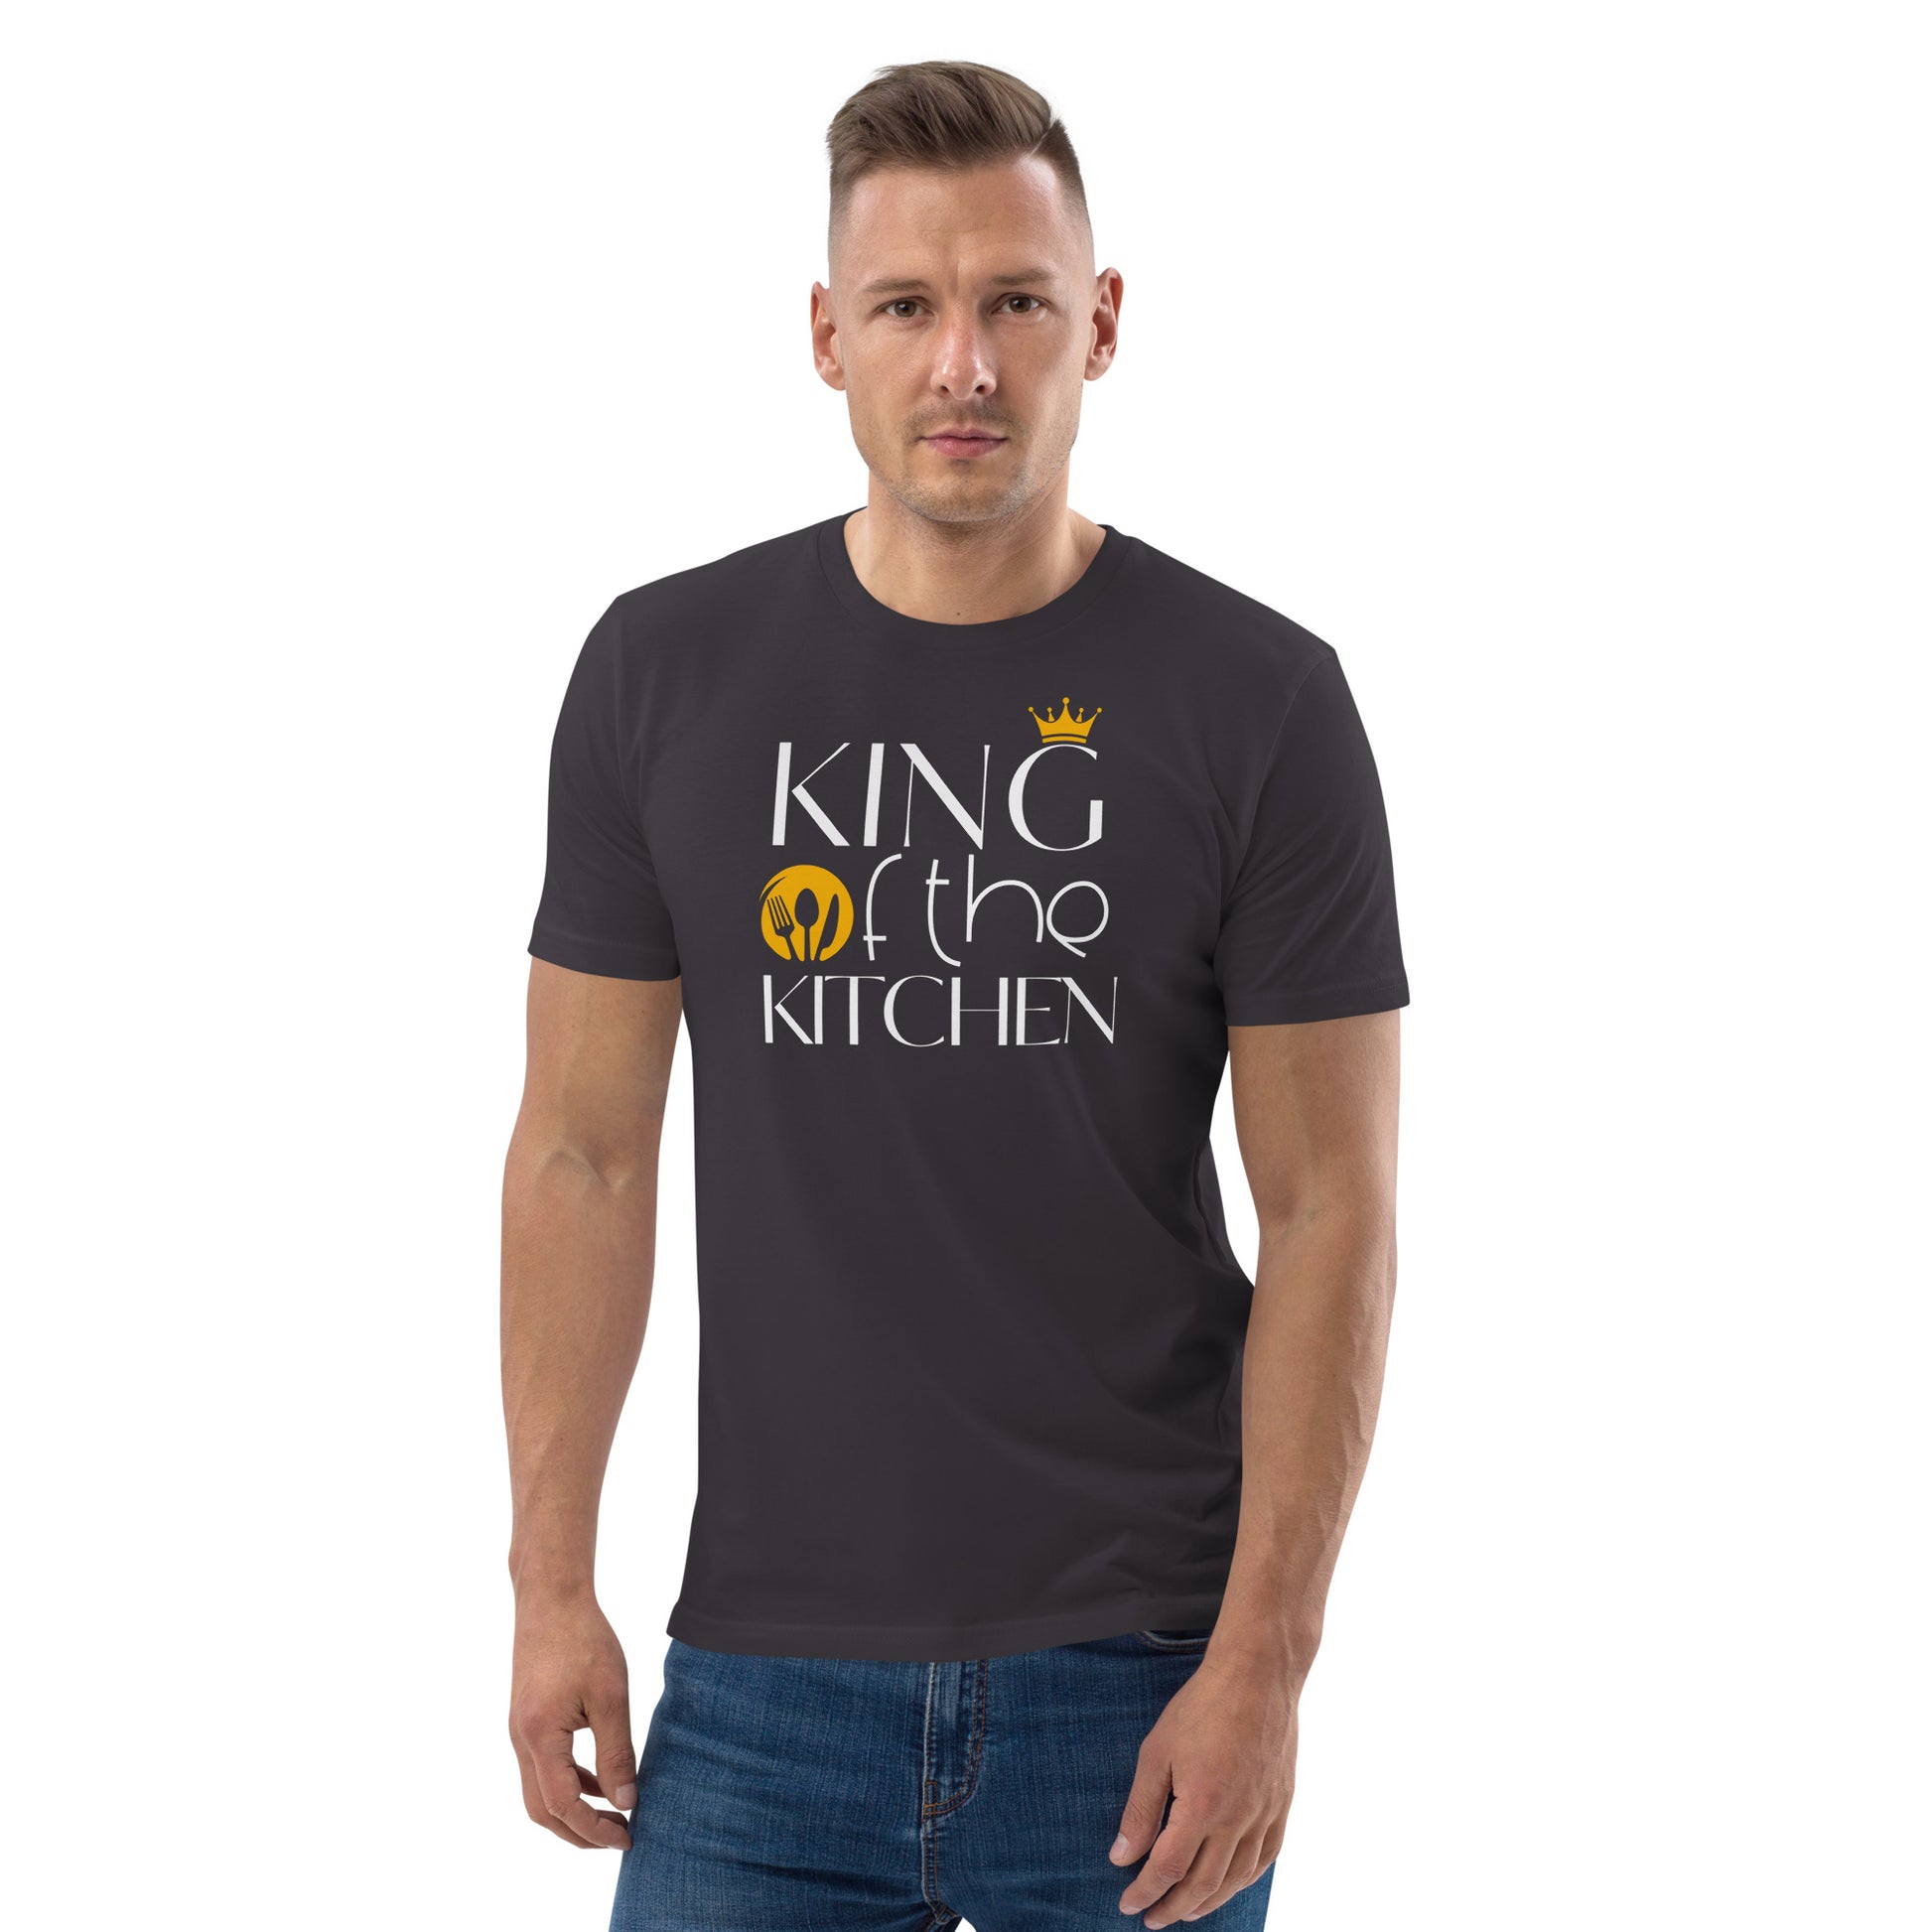 "King of the kitchen" custom made T-Shirt fpr Hobby Chefs, in anthracite